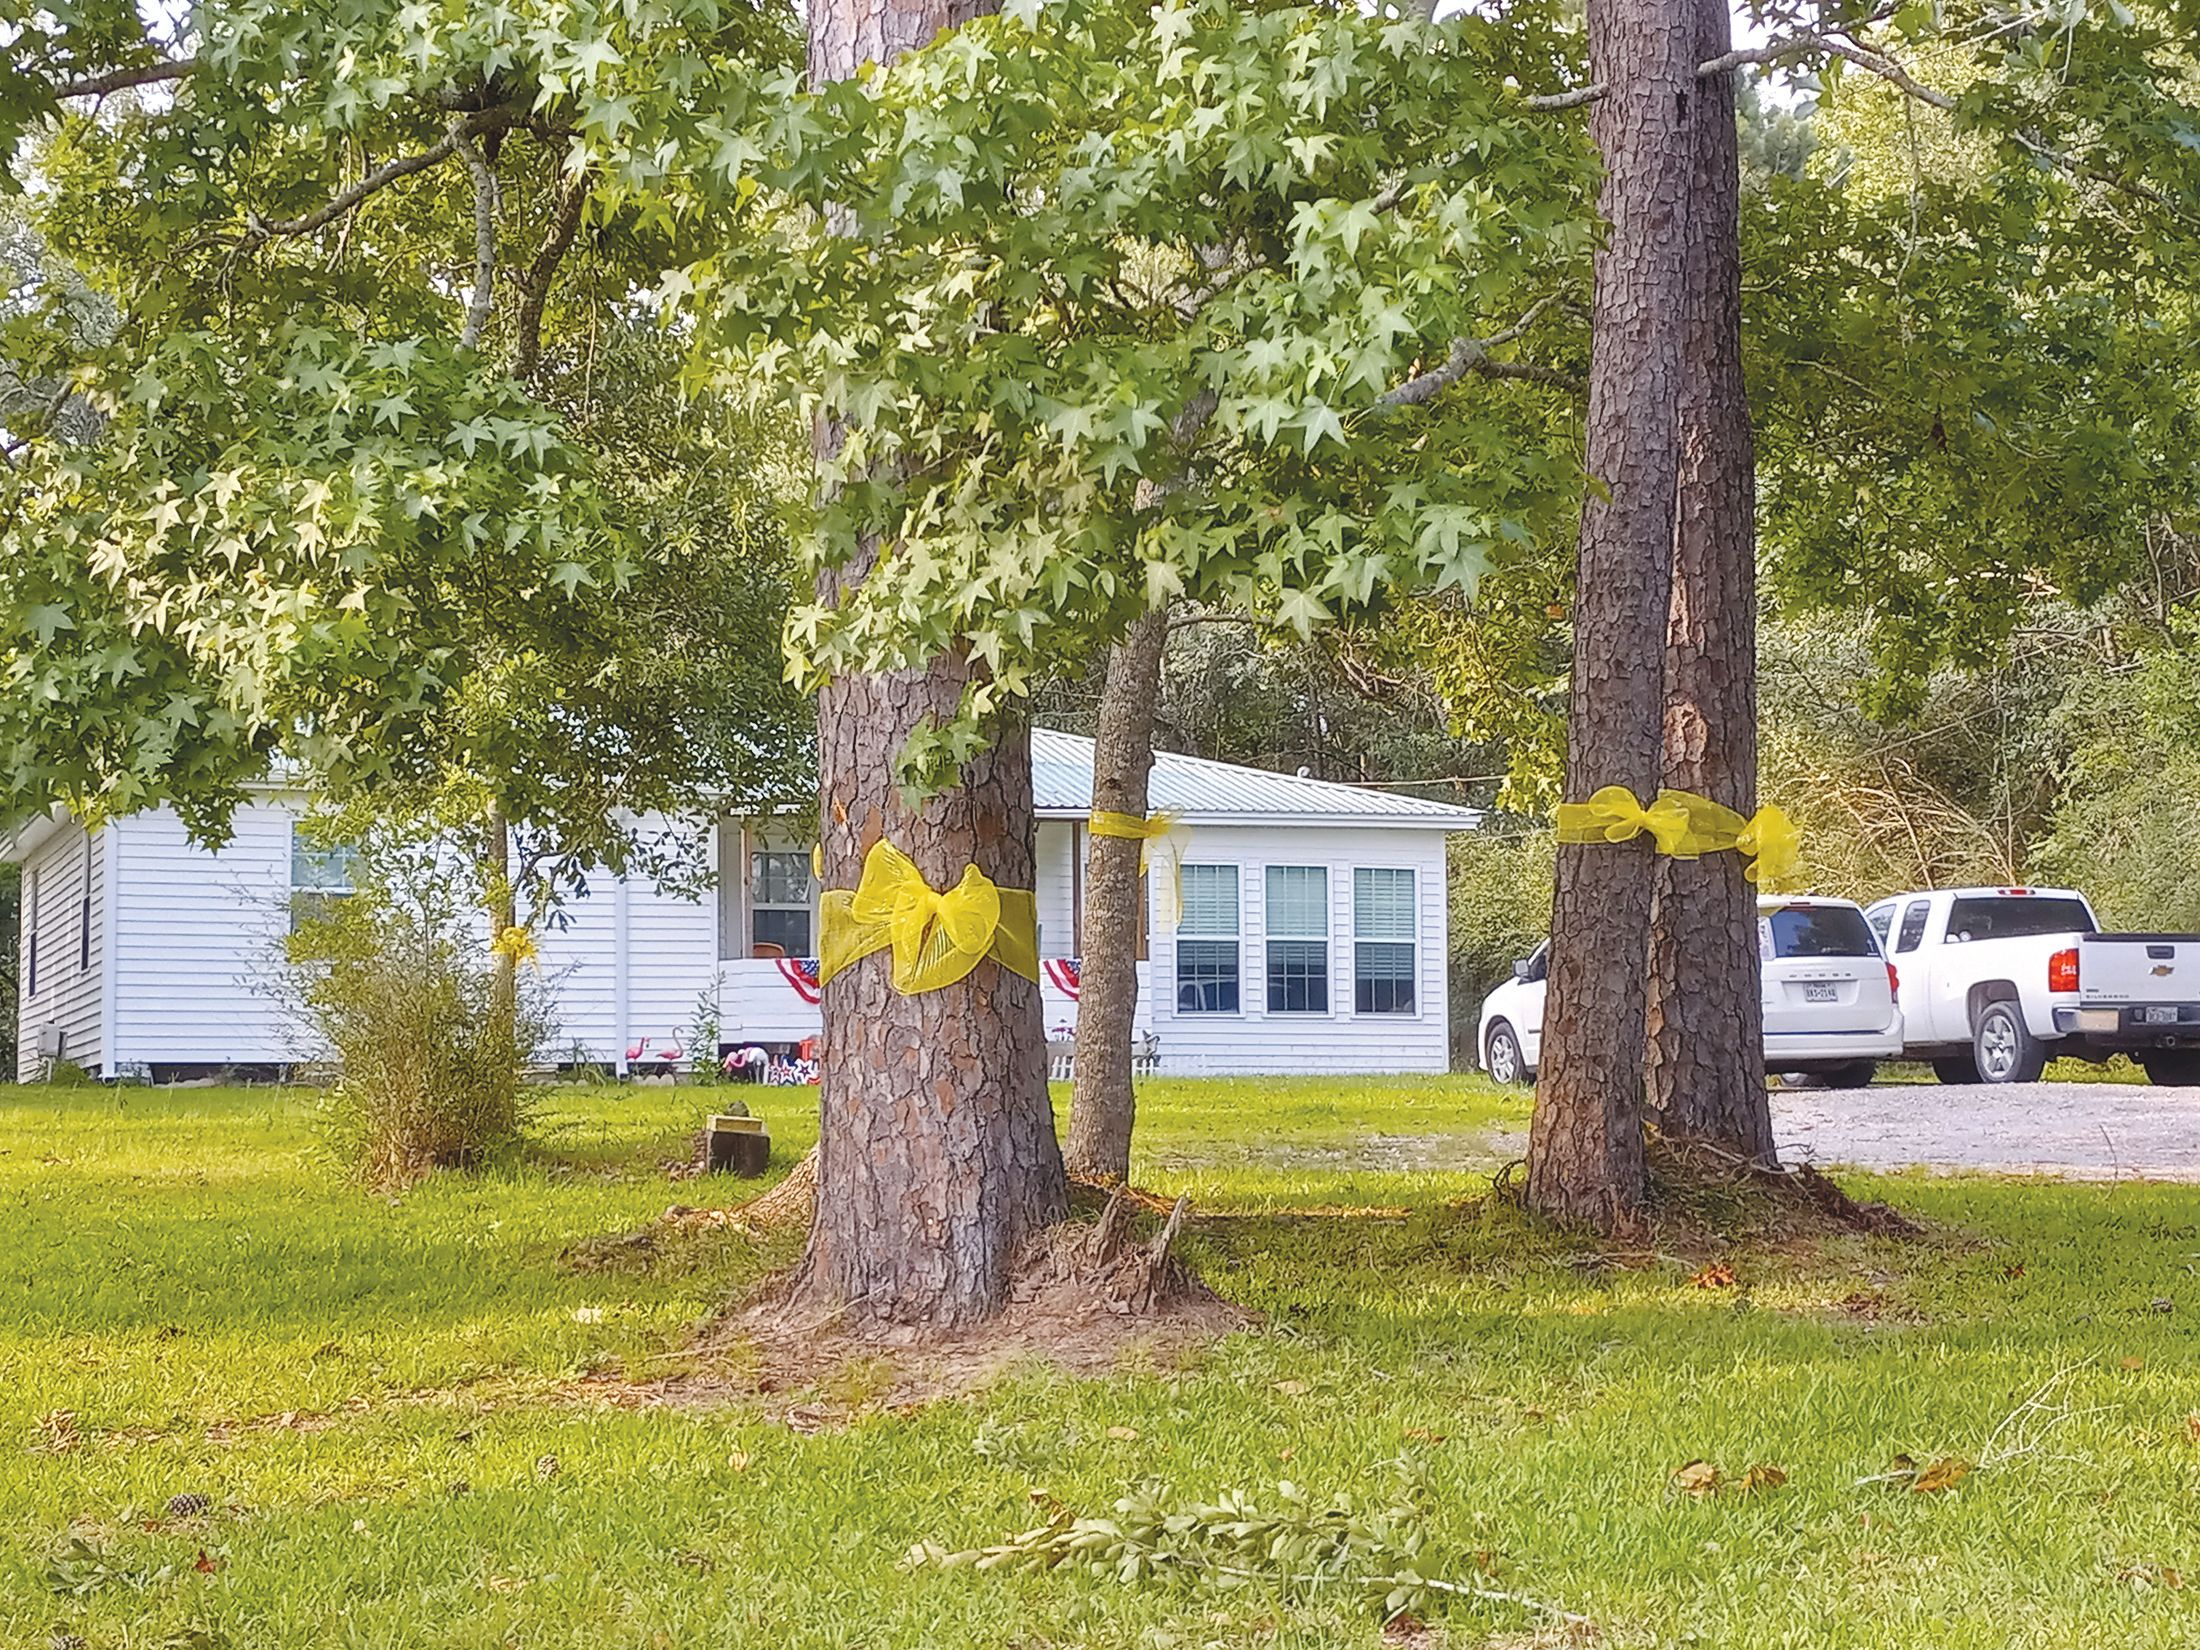 Yellow Ribbons symbolize hope of finding a woman missing since March 10